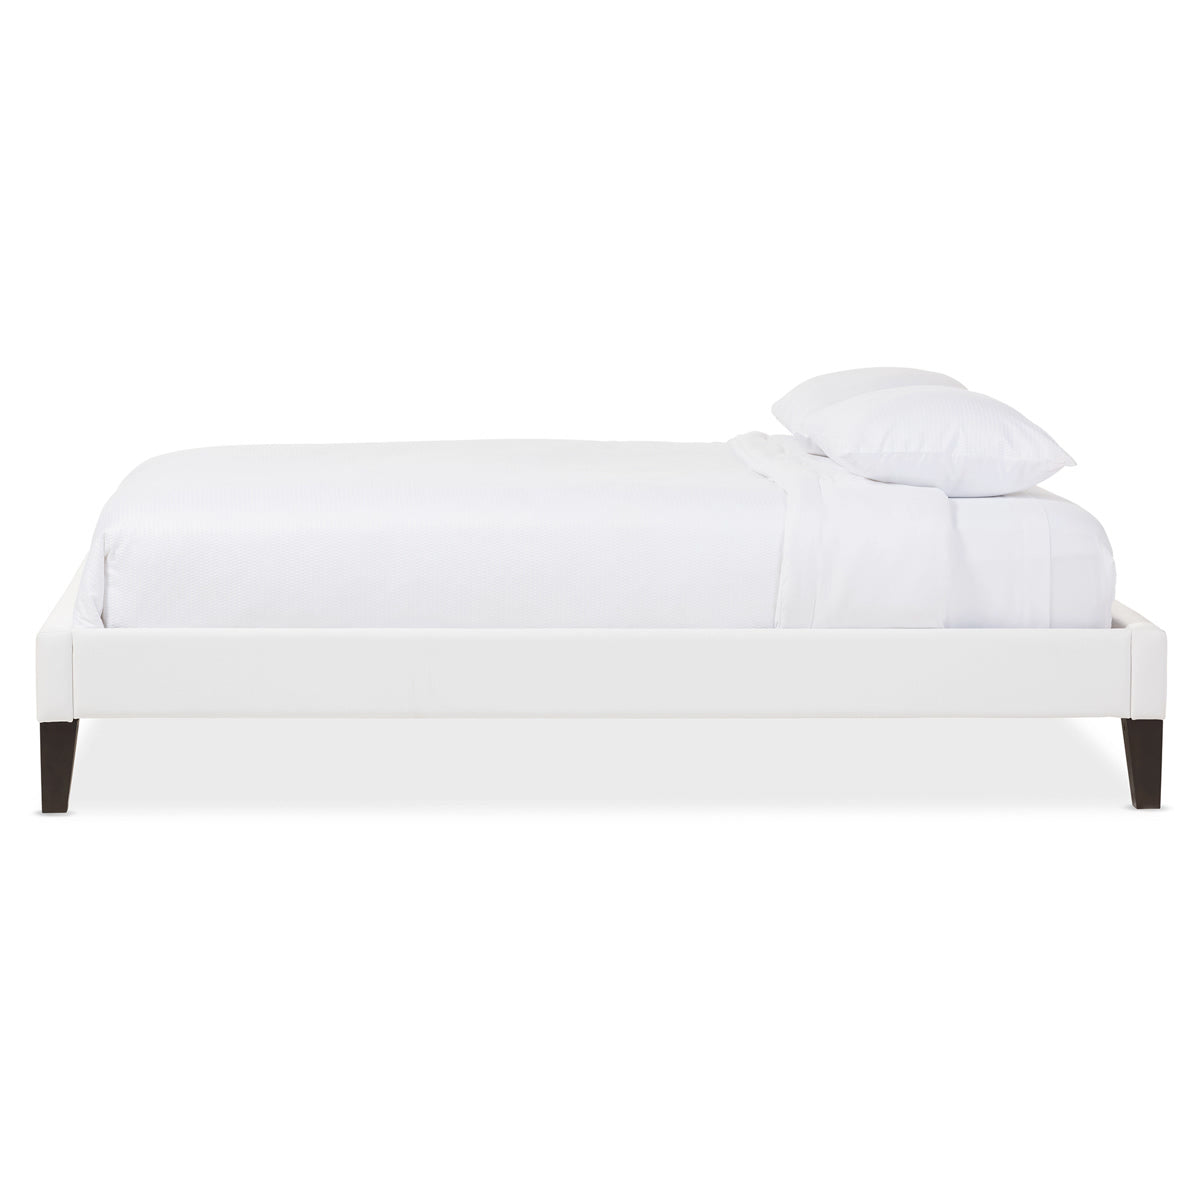 Baxton Studio Lancashire Modern and Contemporary White Faux Leather Upholstered King Size Bed Frame with Tapered Legs  Baxton Studio-King Bed-Minimal And Modern - 3